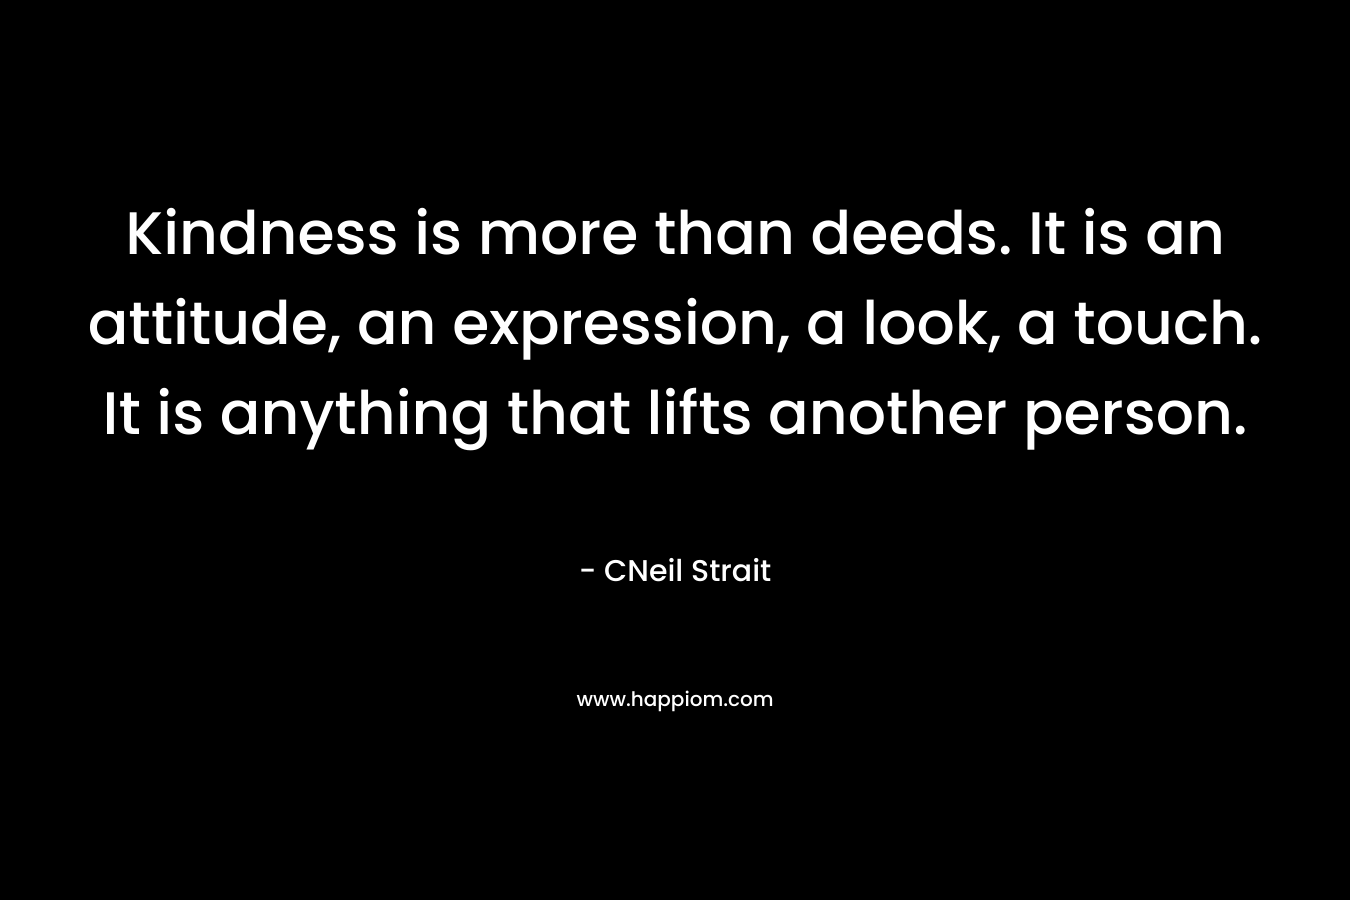 Kindness is more than deeds. It is an attitude, an expression, a look, a touch. It is anything that lifts another person. – CNeil Strait